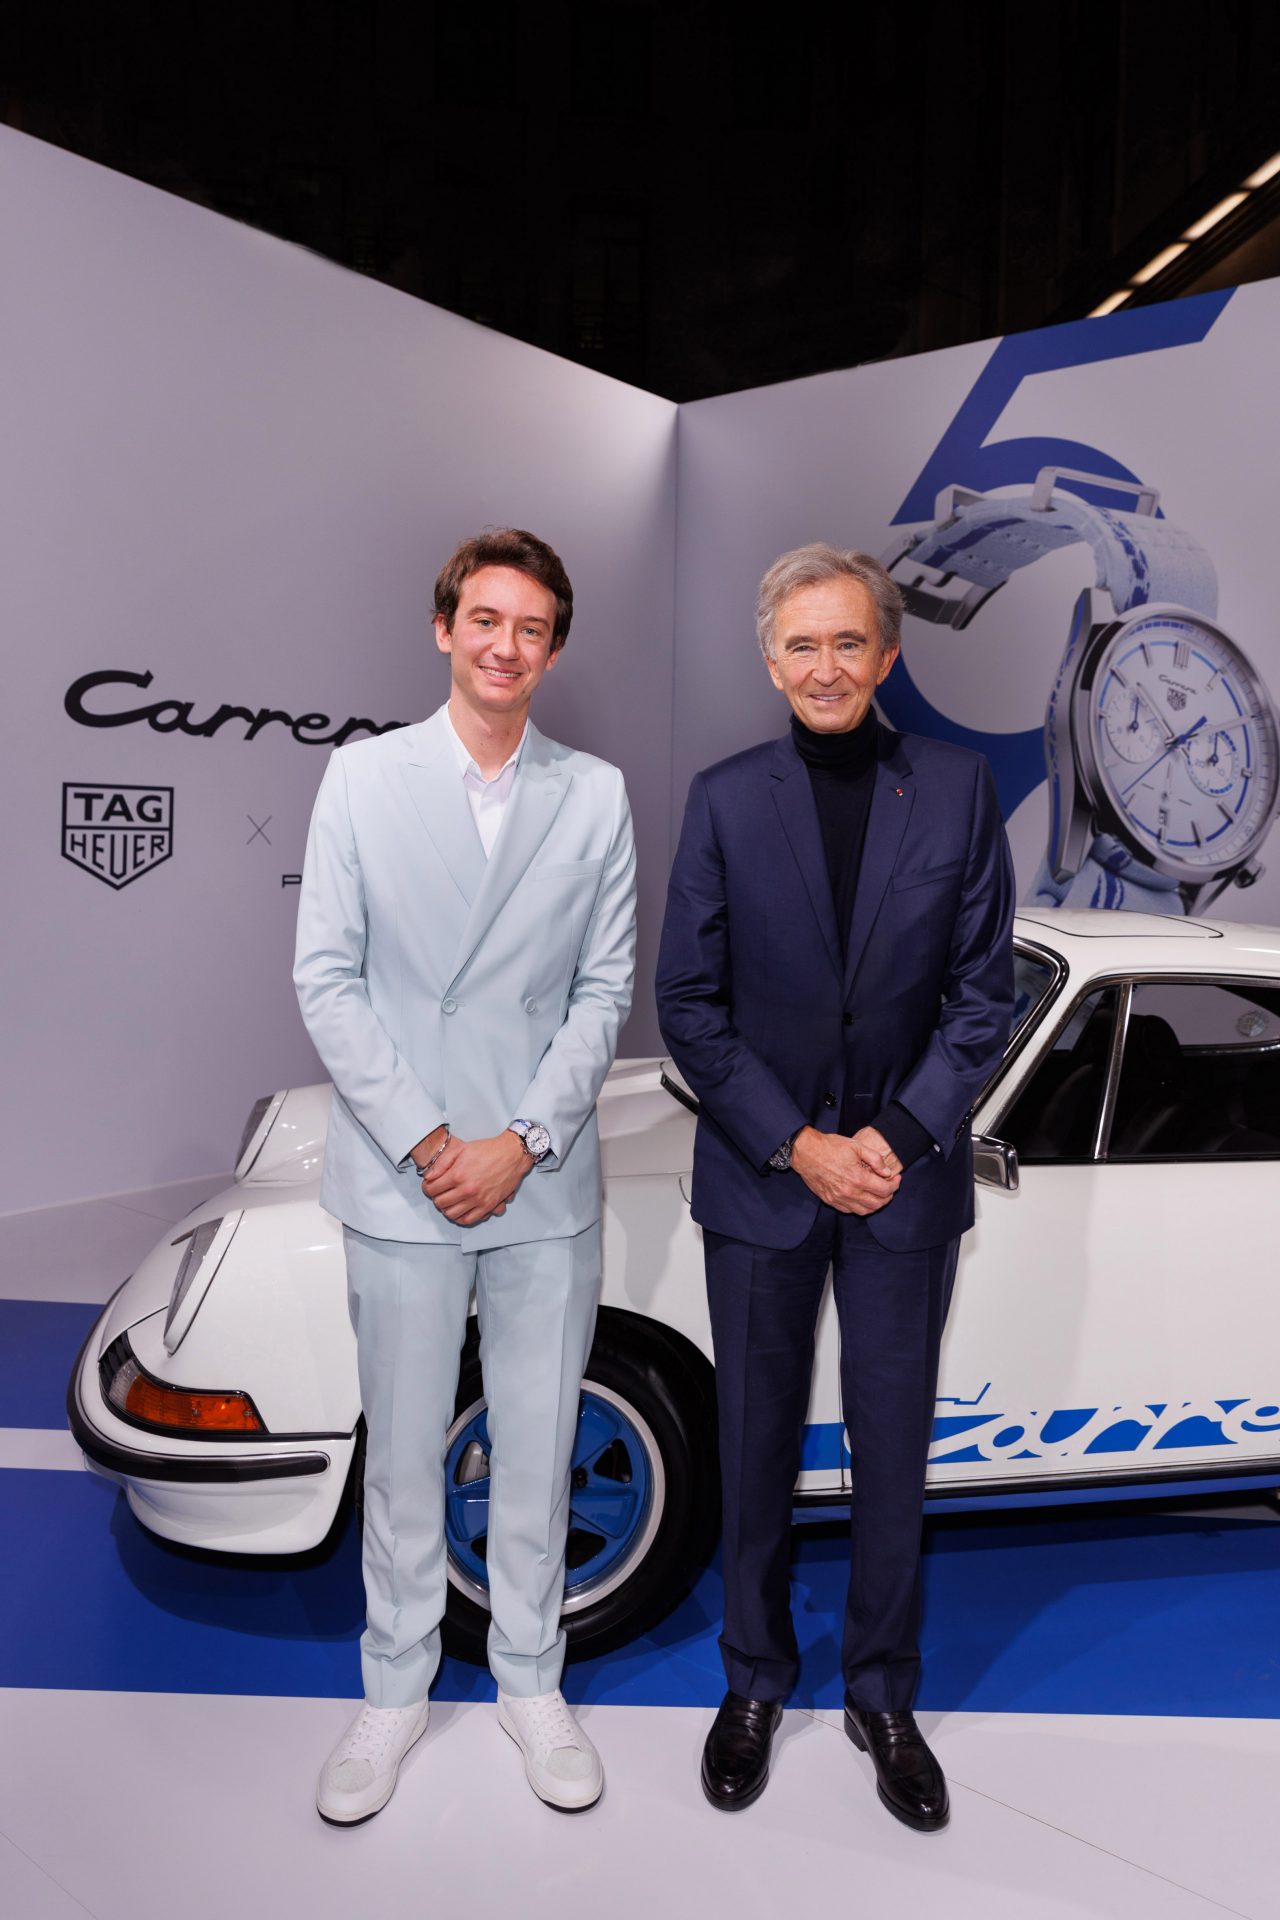 Interview - Frédéric Arnault CEO TAG Heuer On Partnership with Porsche